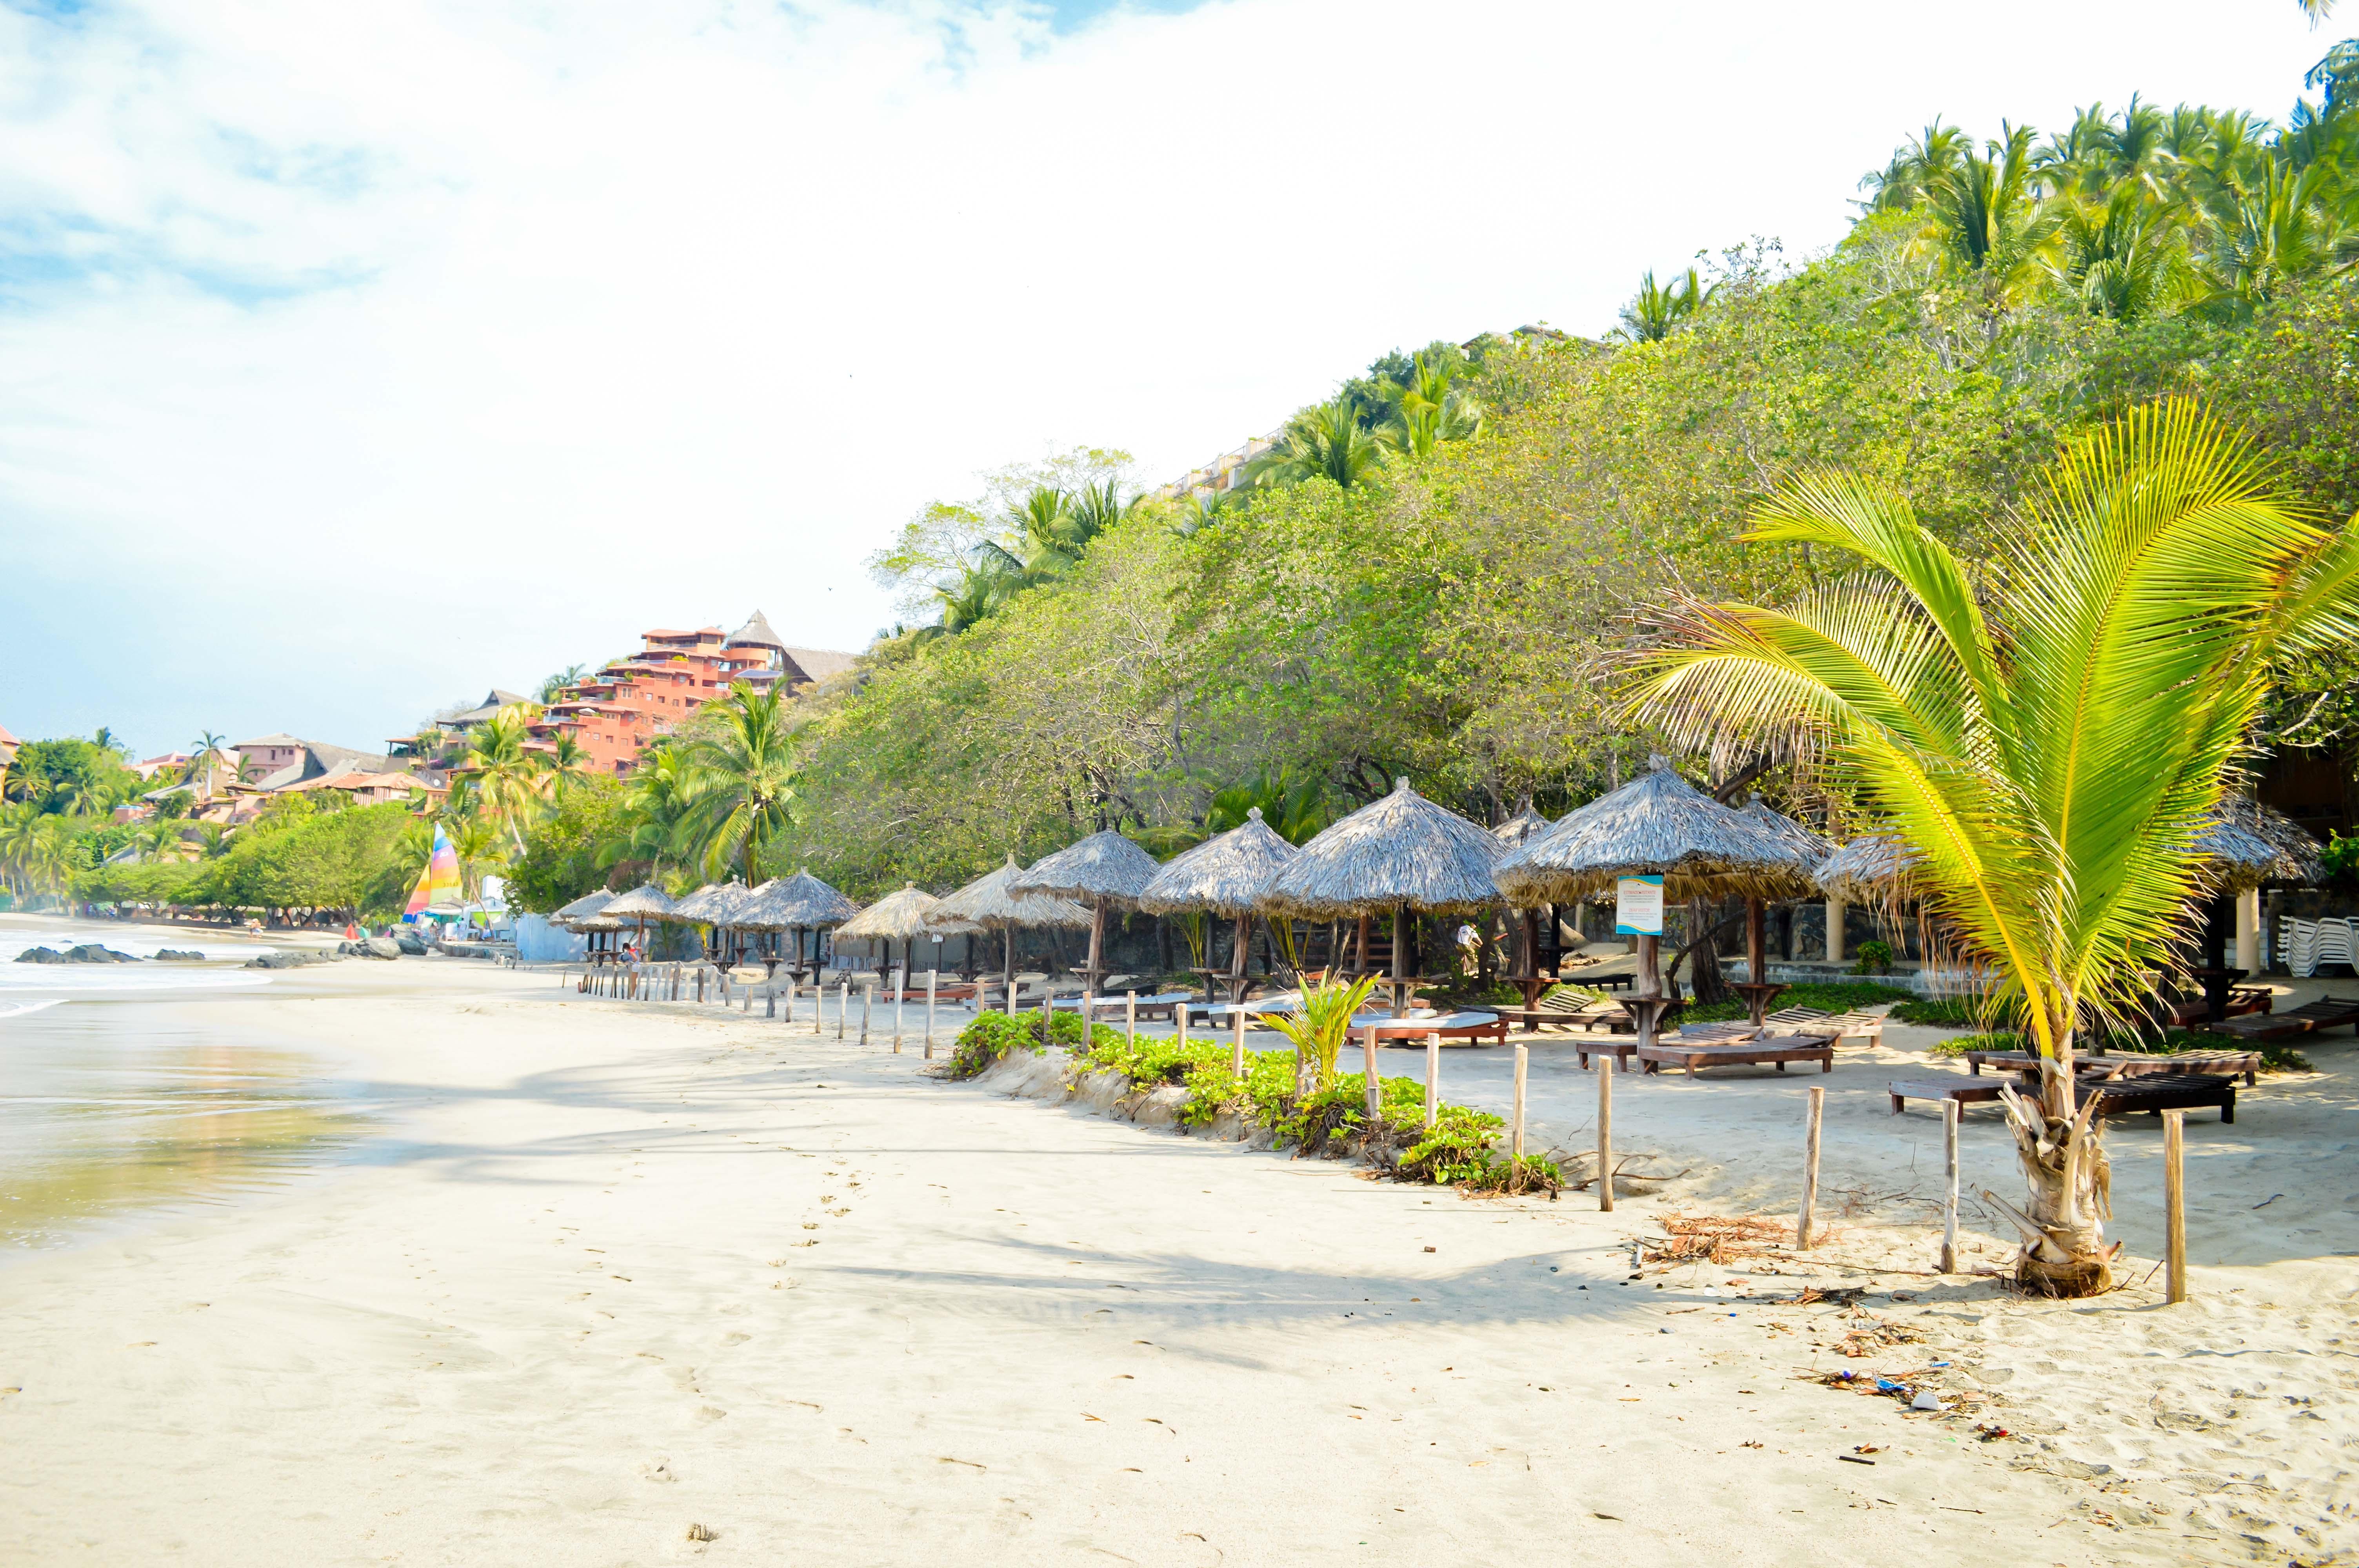 HOTEL CATALINA BEACH RESORT ZIHUATANEJO 4* (Mexico) - from US$ 53 | BOOKED